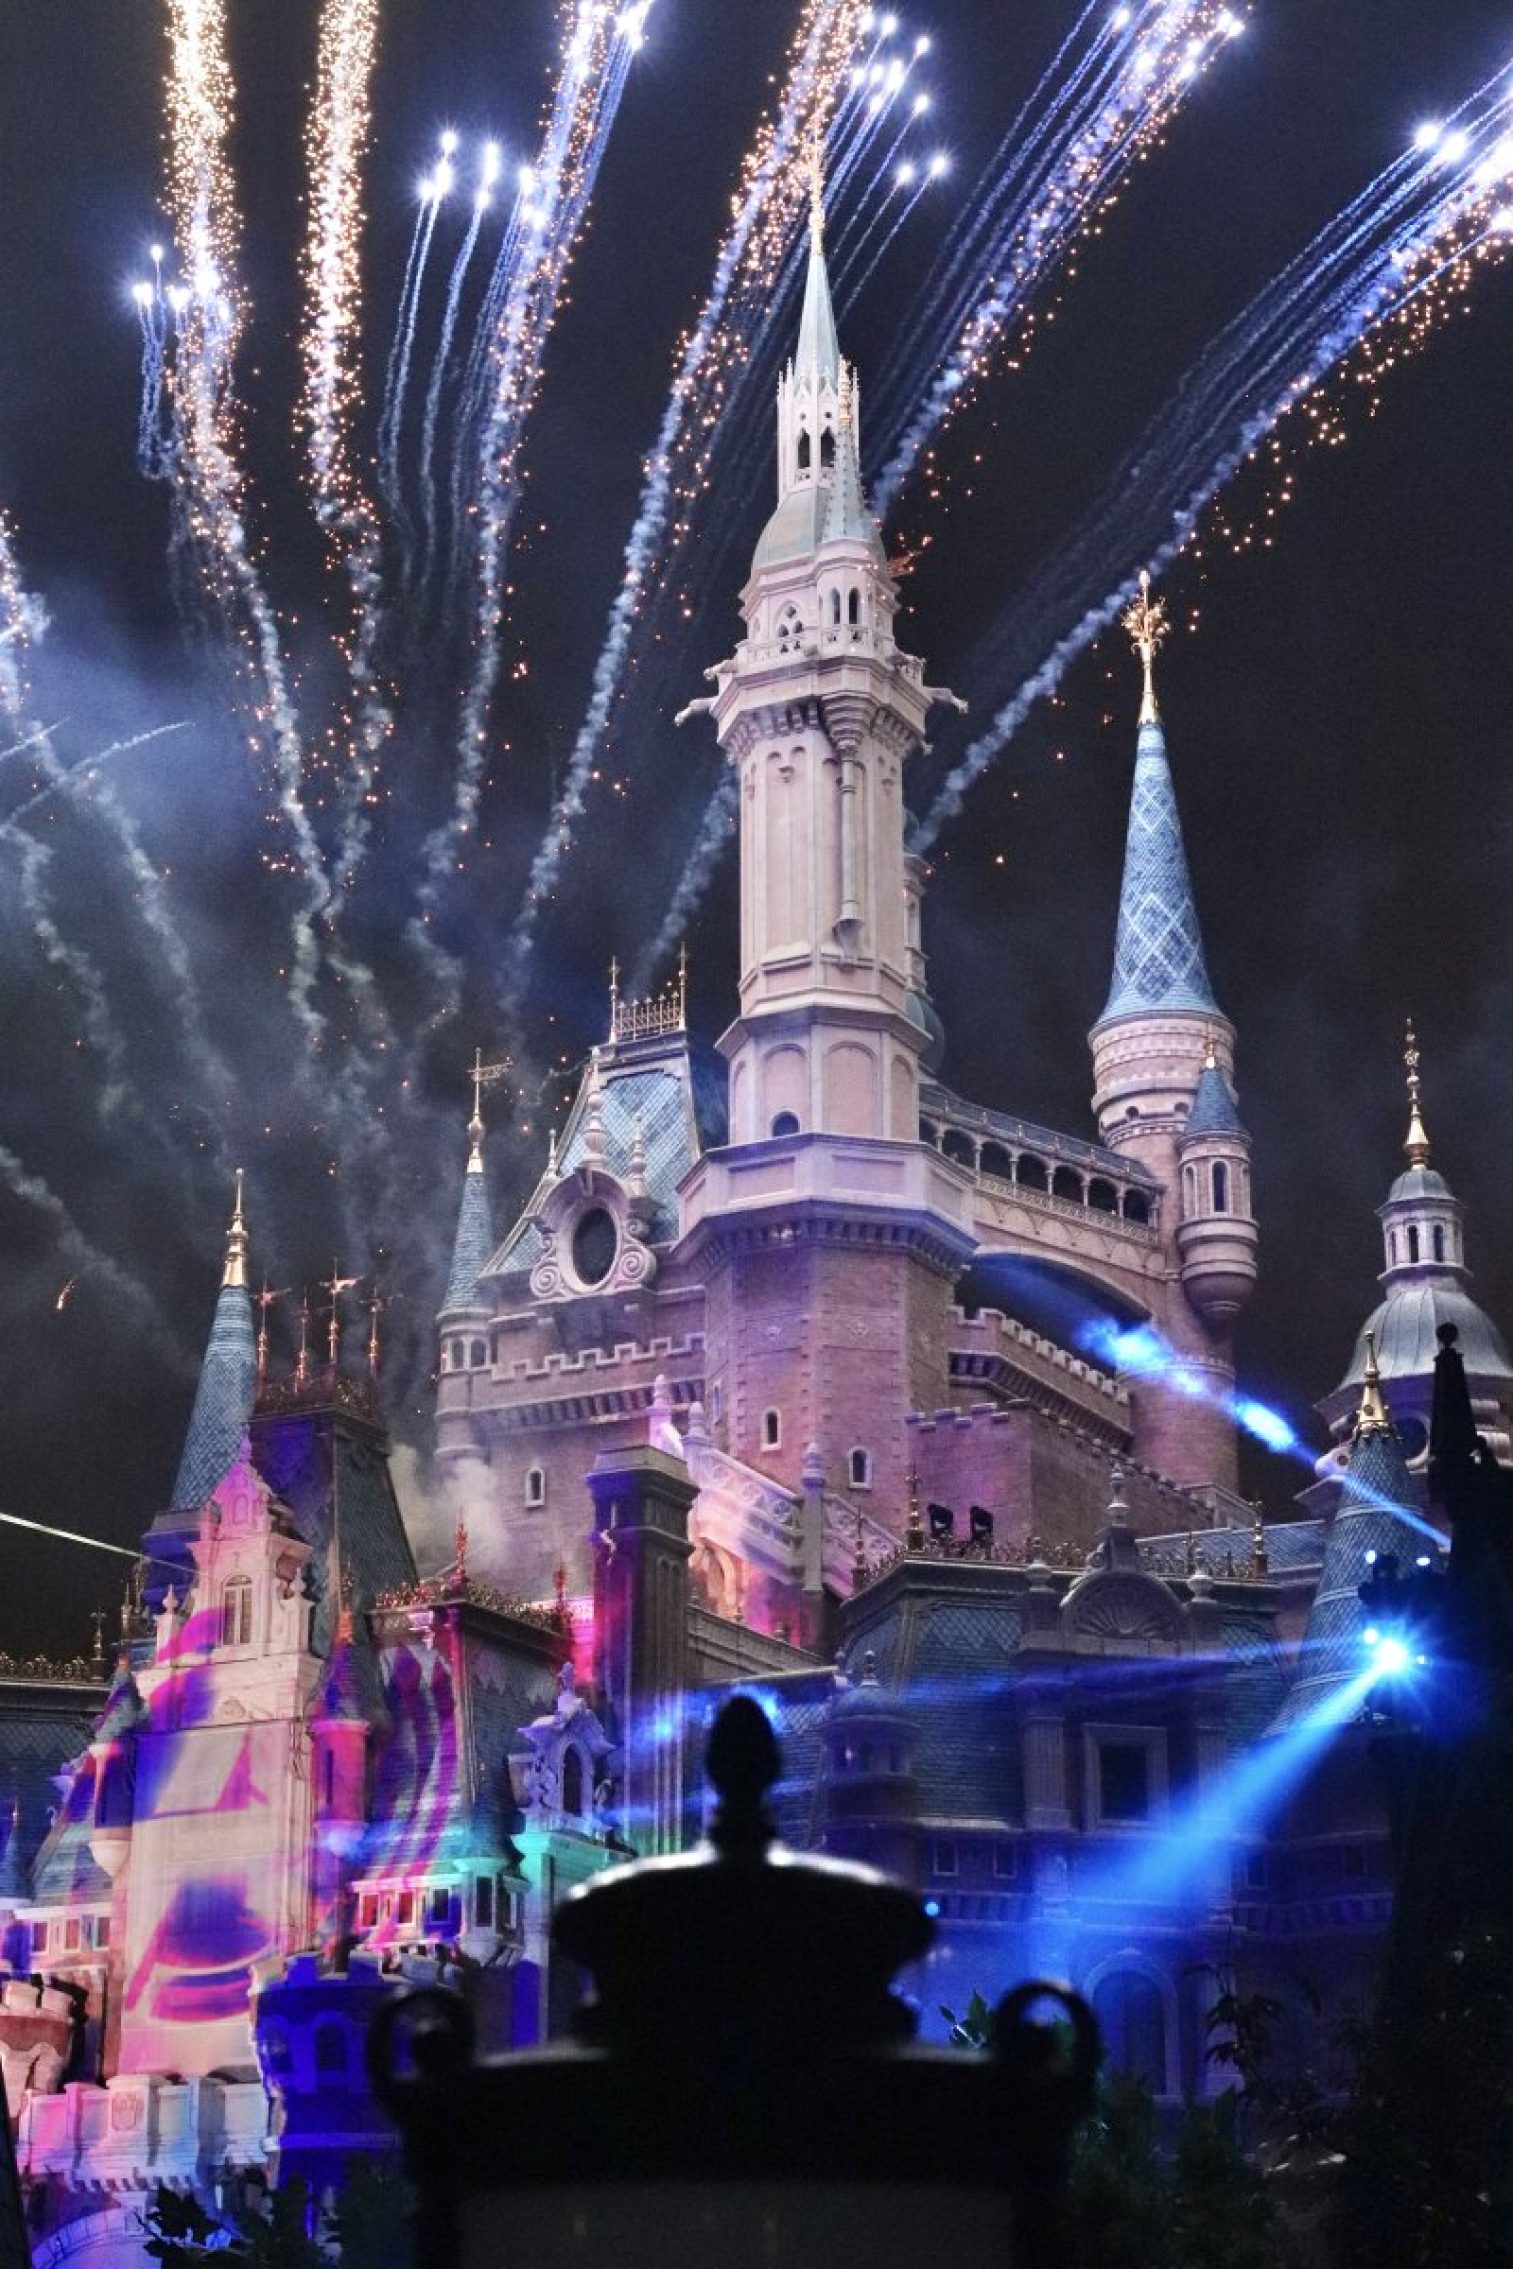 Disney castle with fireworks display during night time